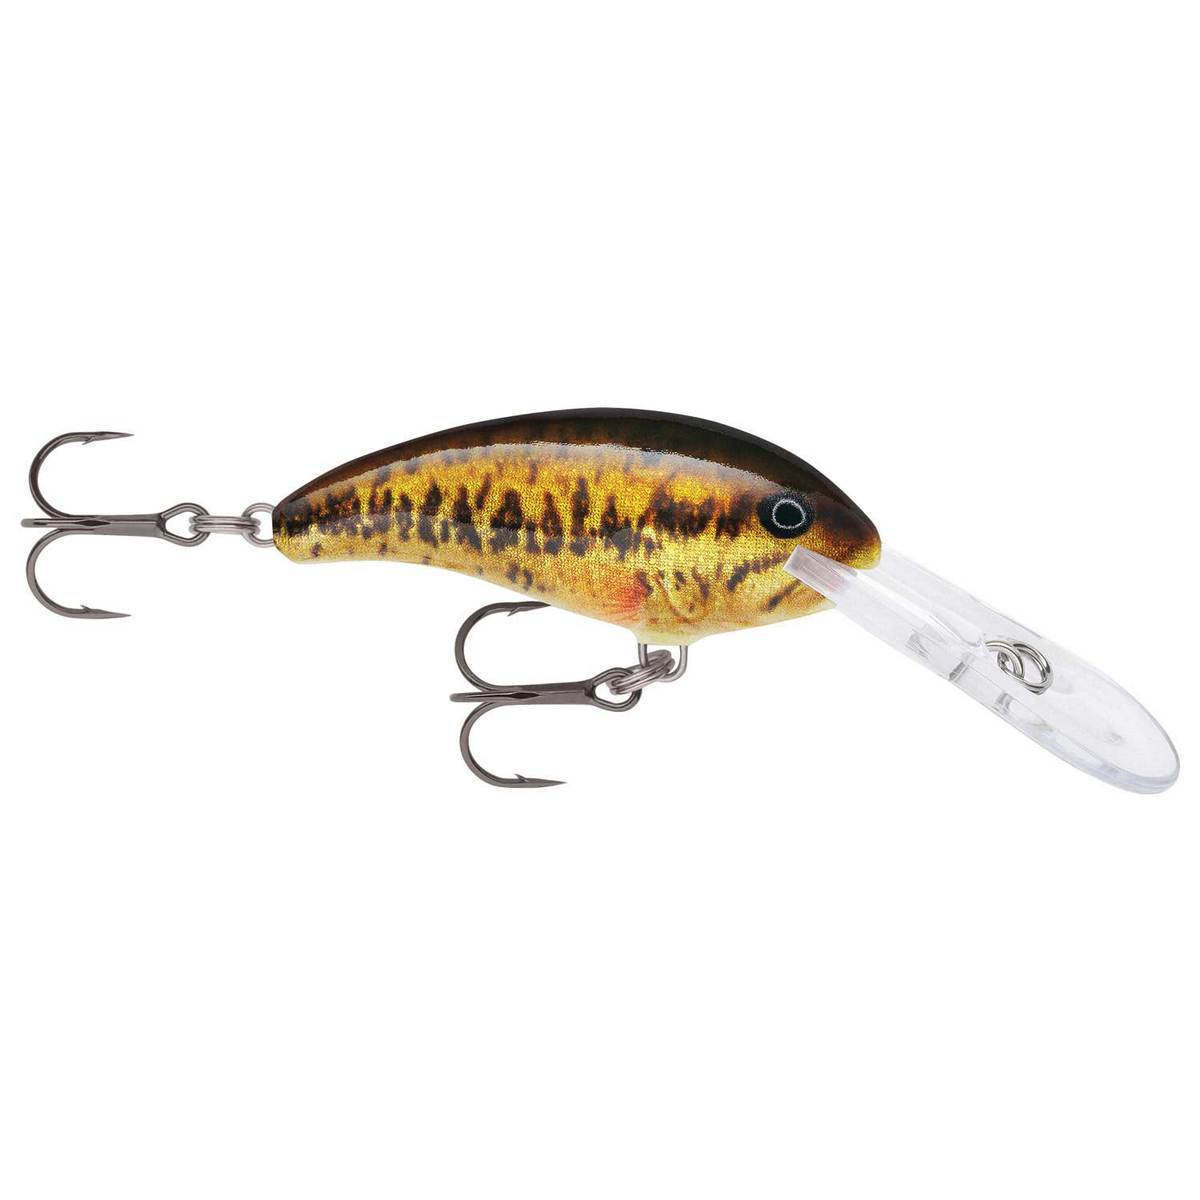 Rapala Shad Dancer Crankbait - Live Smallmouth Bass, 1/4oz, 2in, 7-10ft